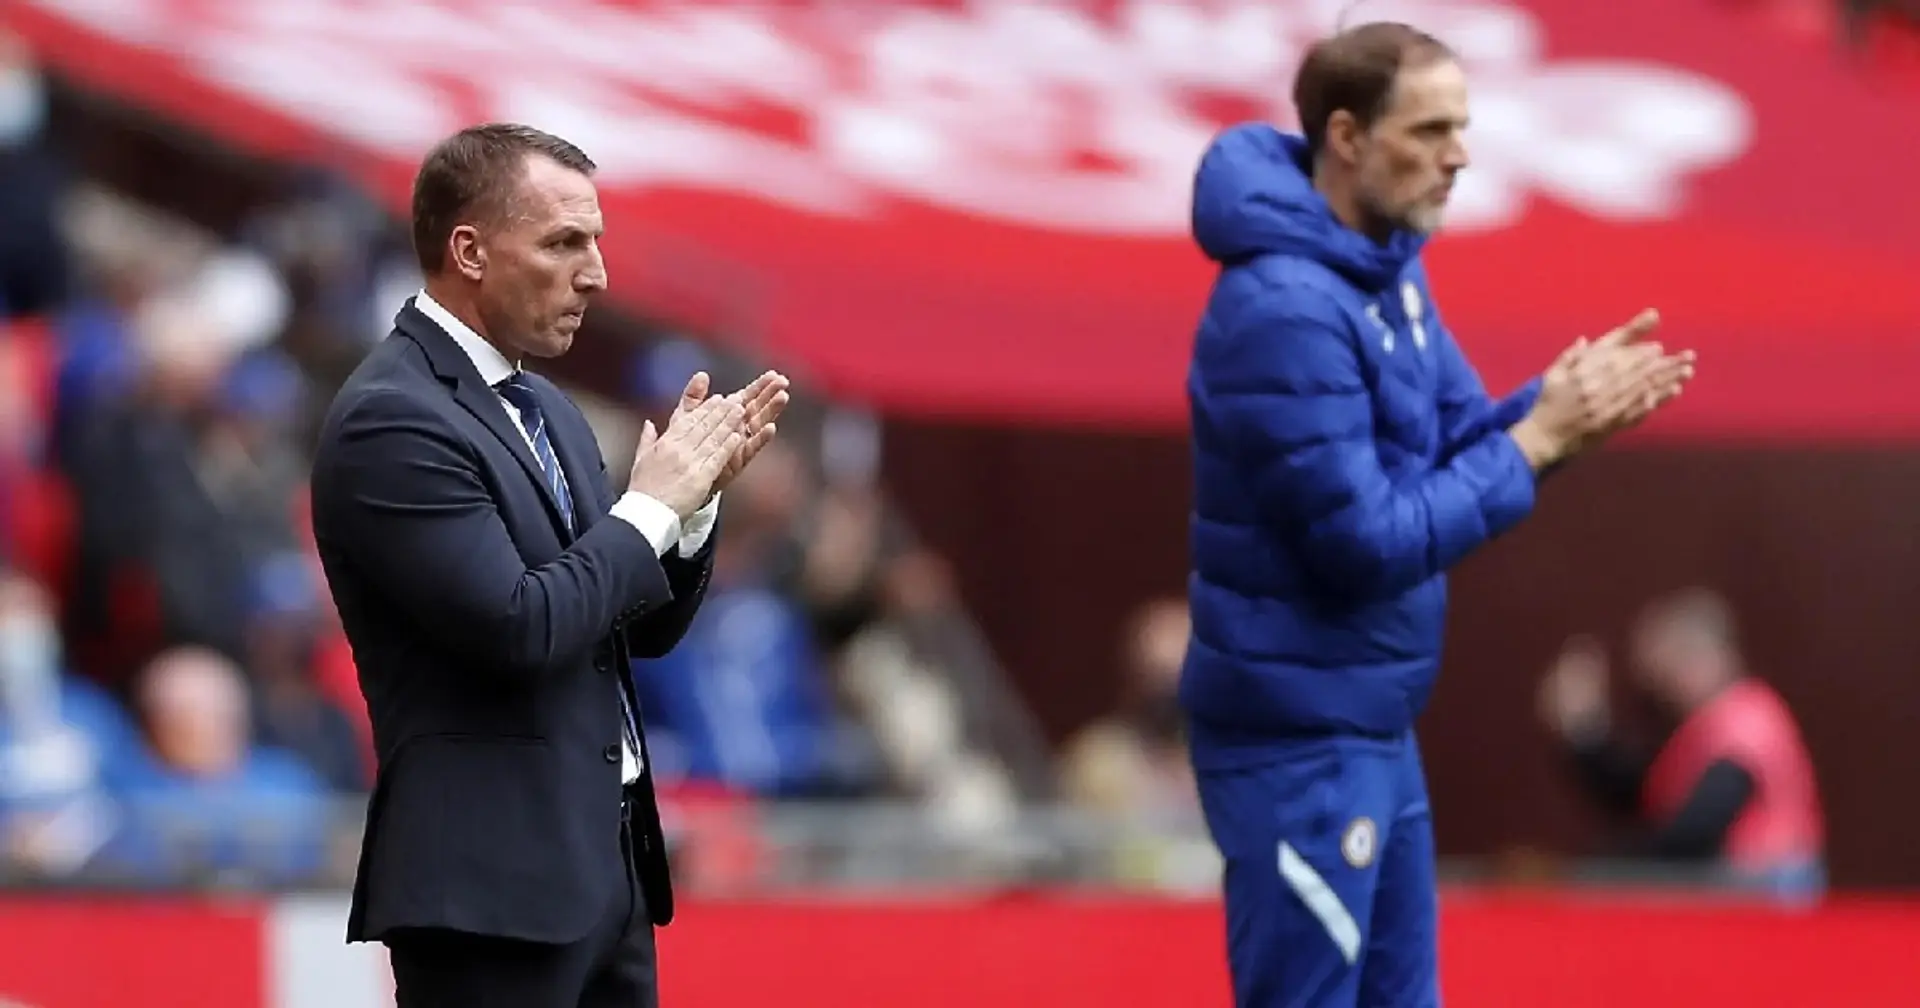 'They are the best team we’ve played': Brendan Rodgers on Chelsea